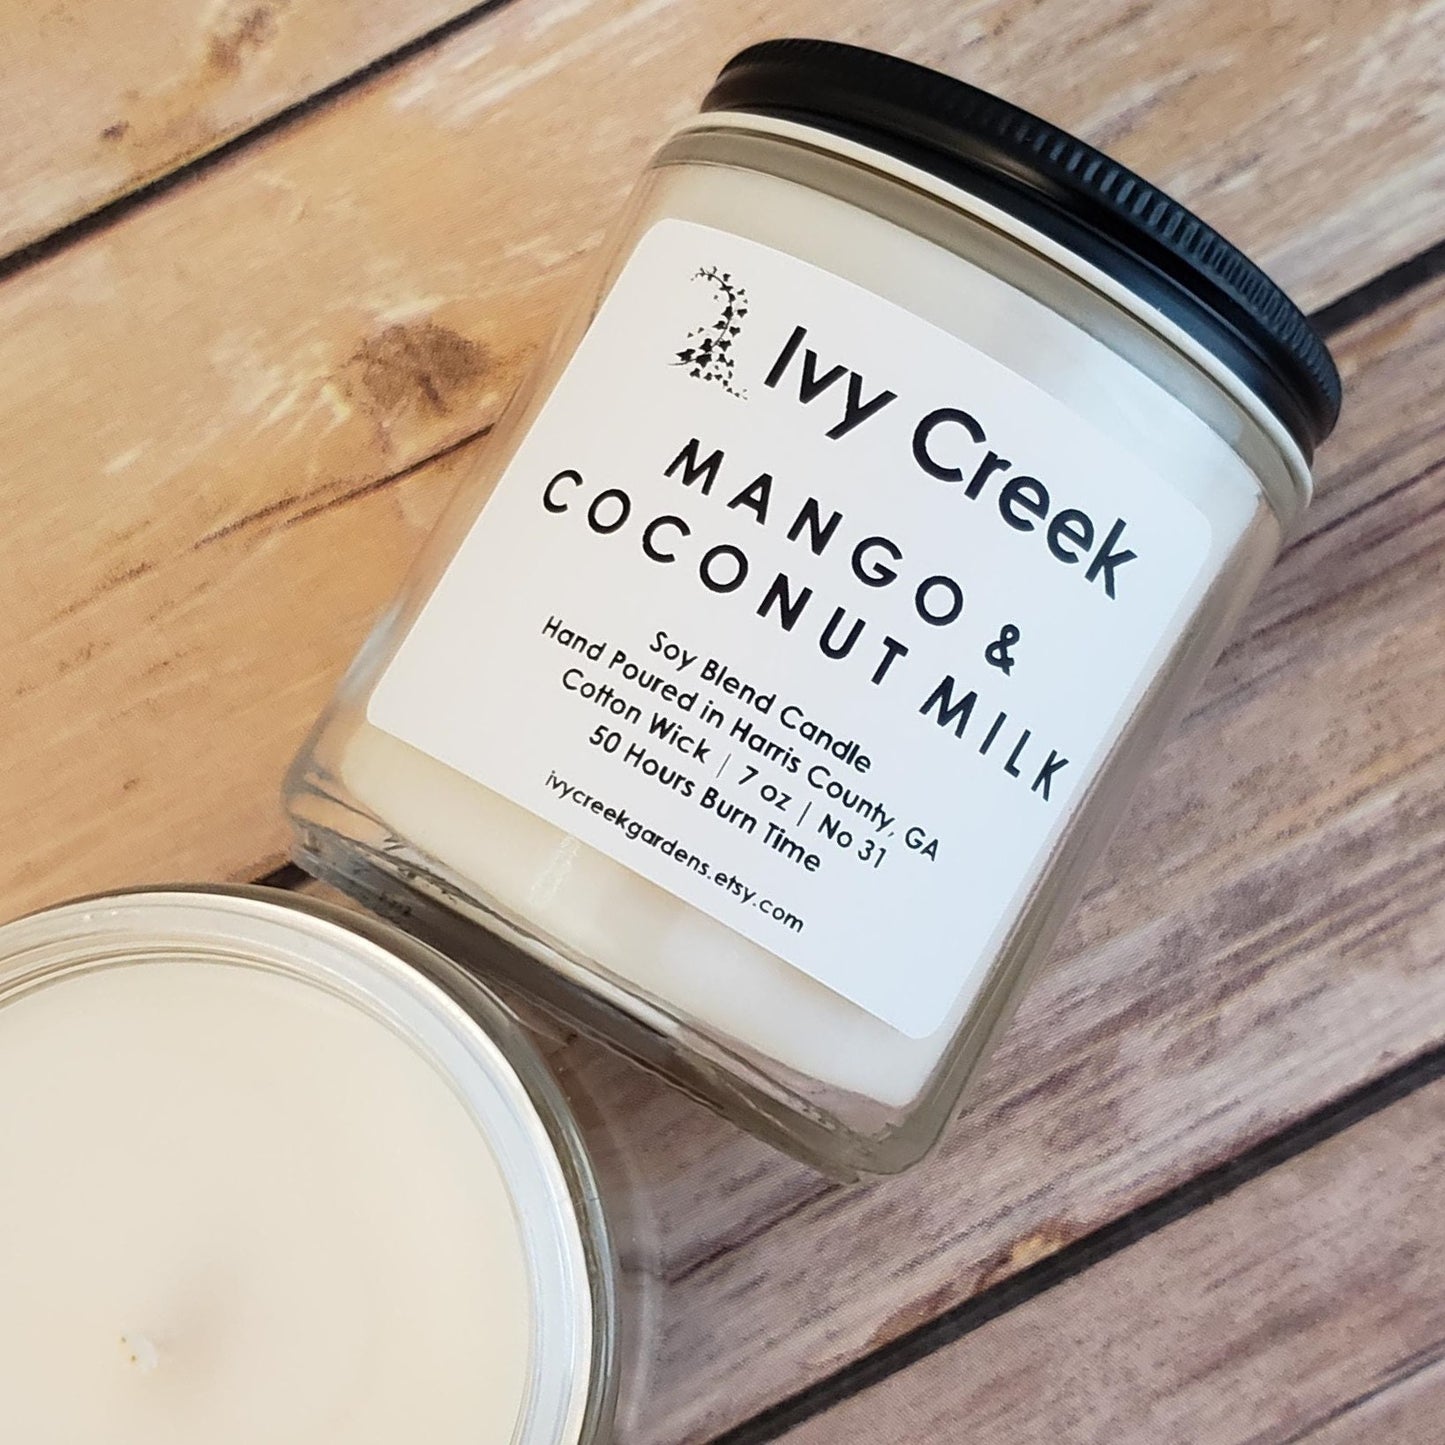 Ivy Creek No 31 | Mango & Coconut Milk Soy Blend Candle | Hand Poured | 7 oz | Cotton Wick | Small Batch | Clean Burning | Container Candle